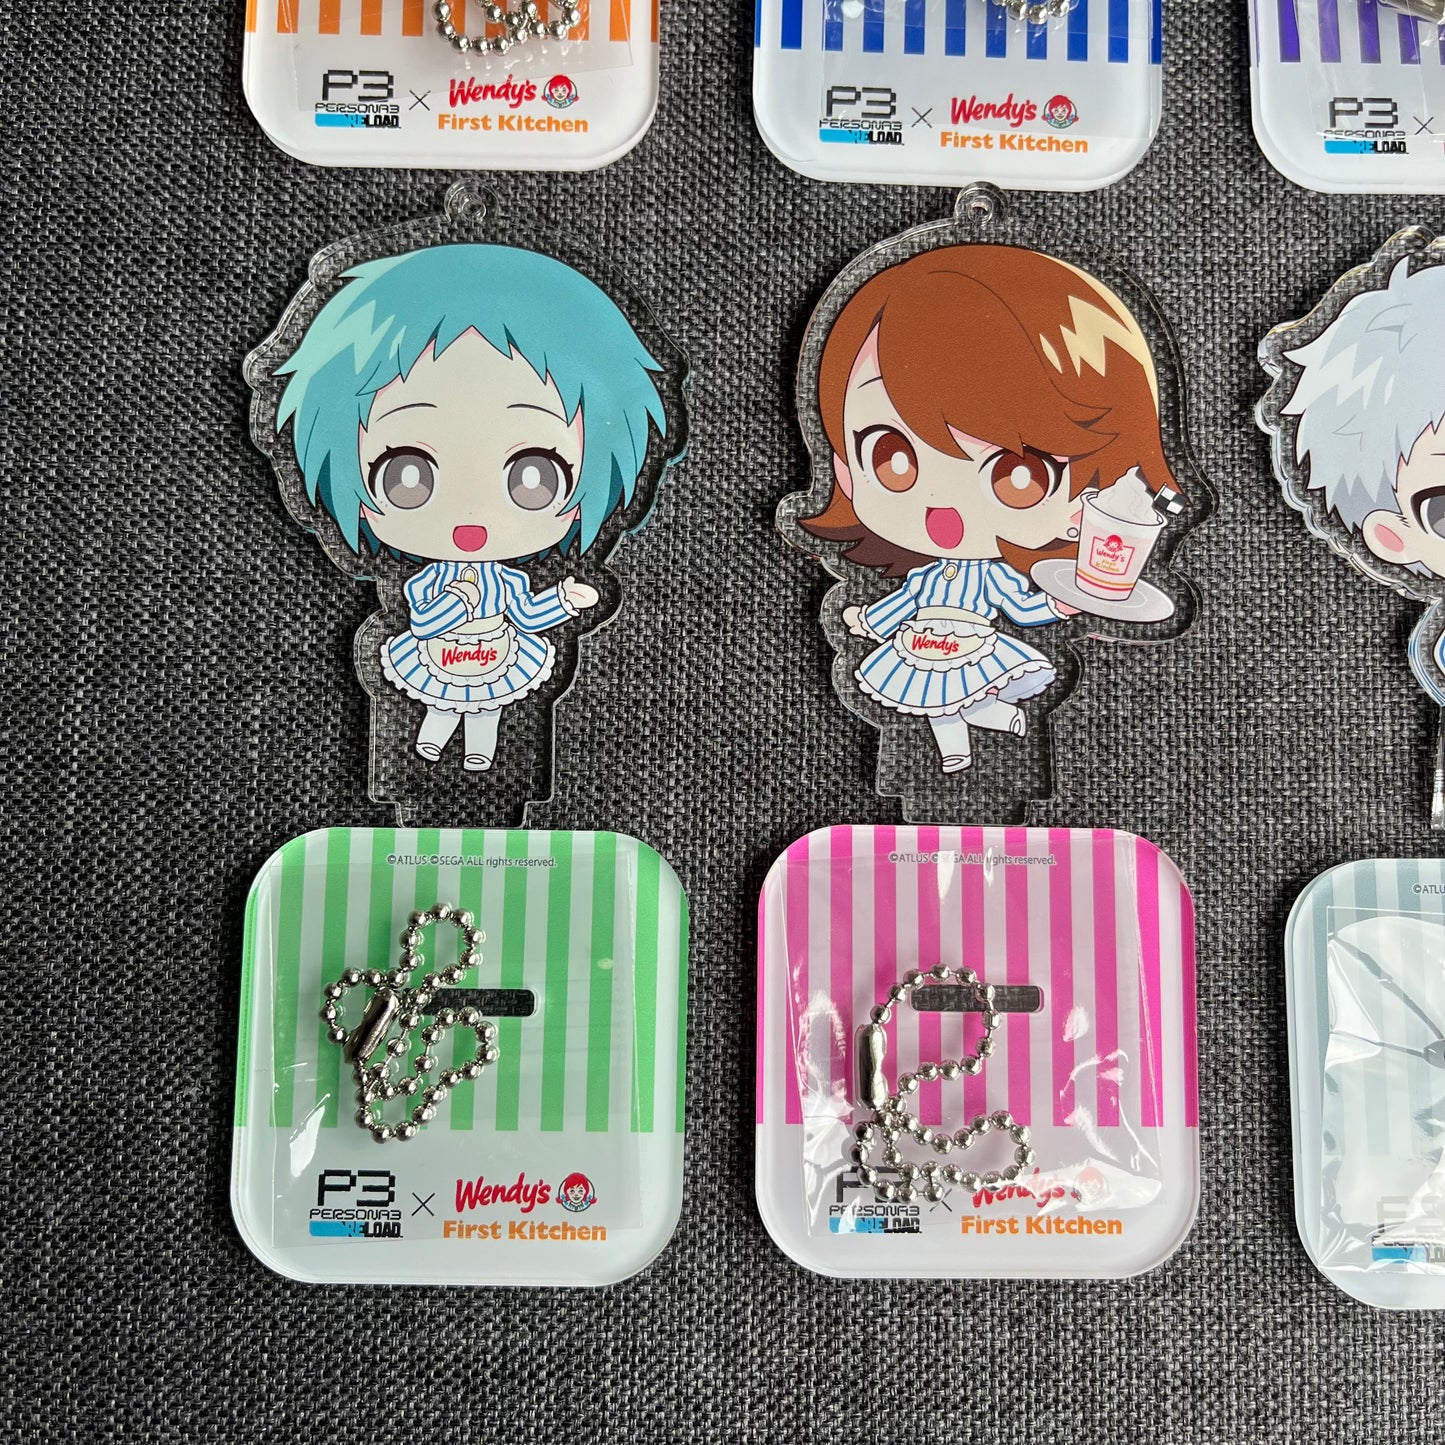 Persona 3 x Wendy’s Collab Acrylic Standees / Charms